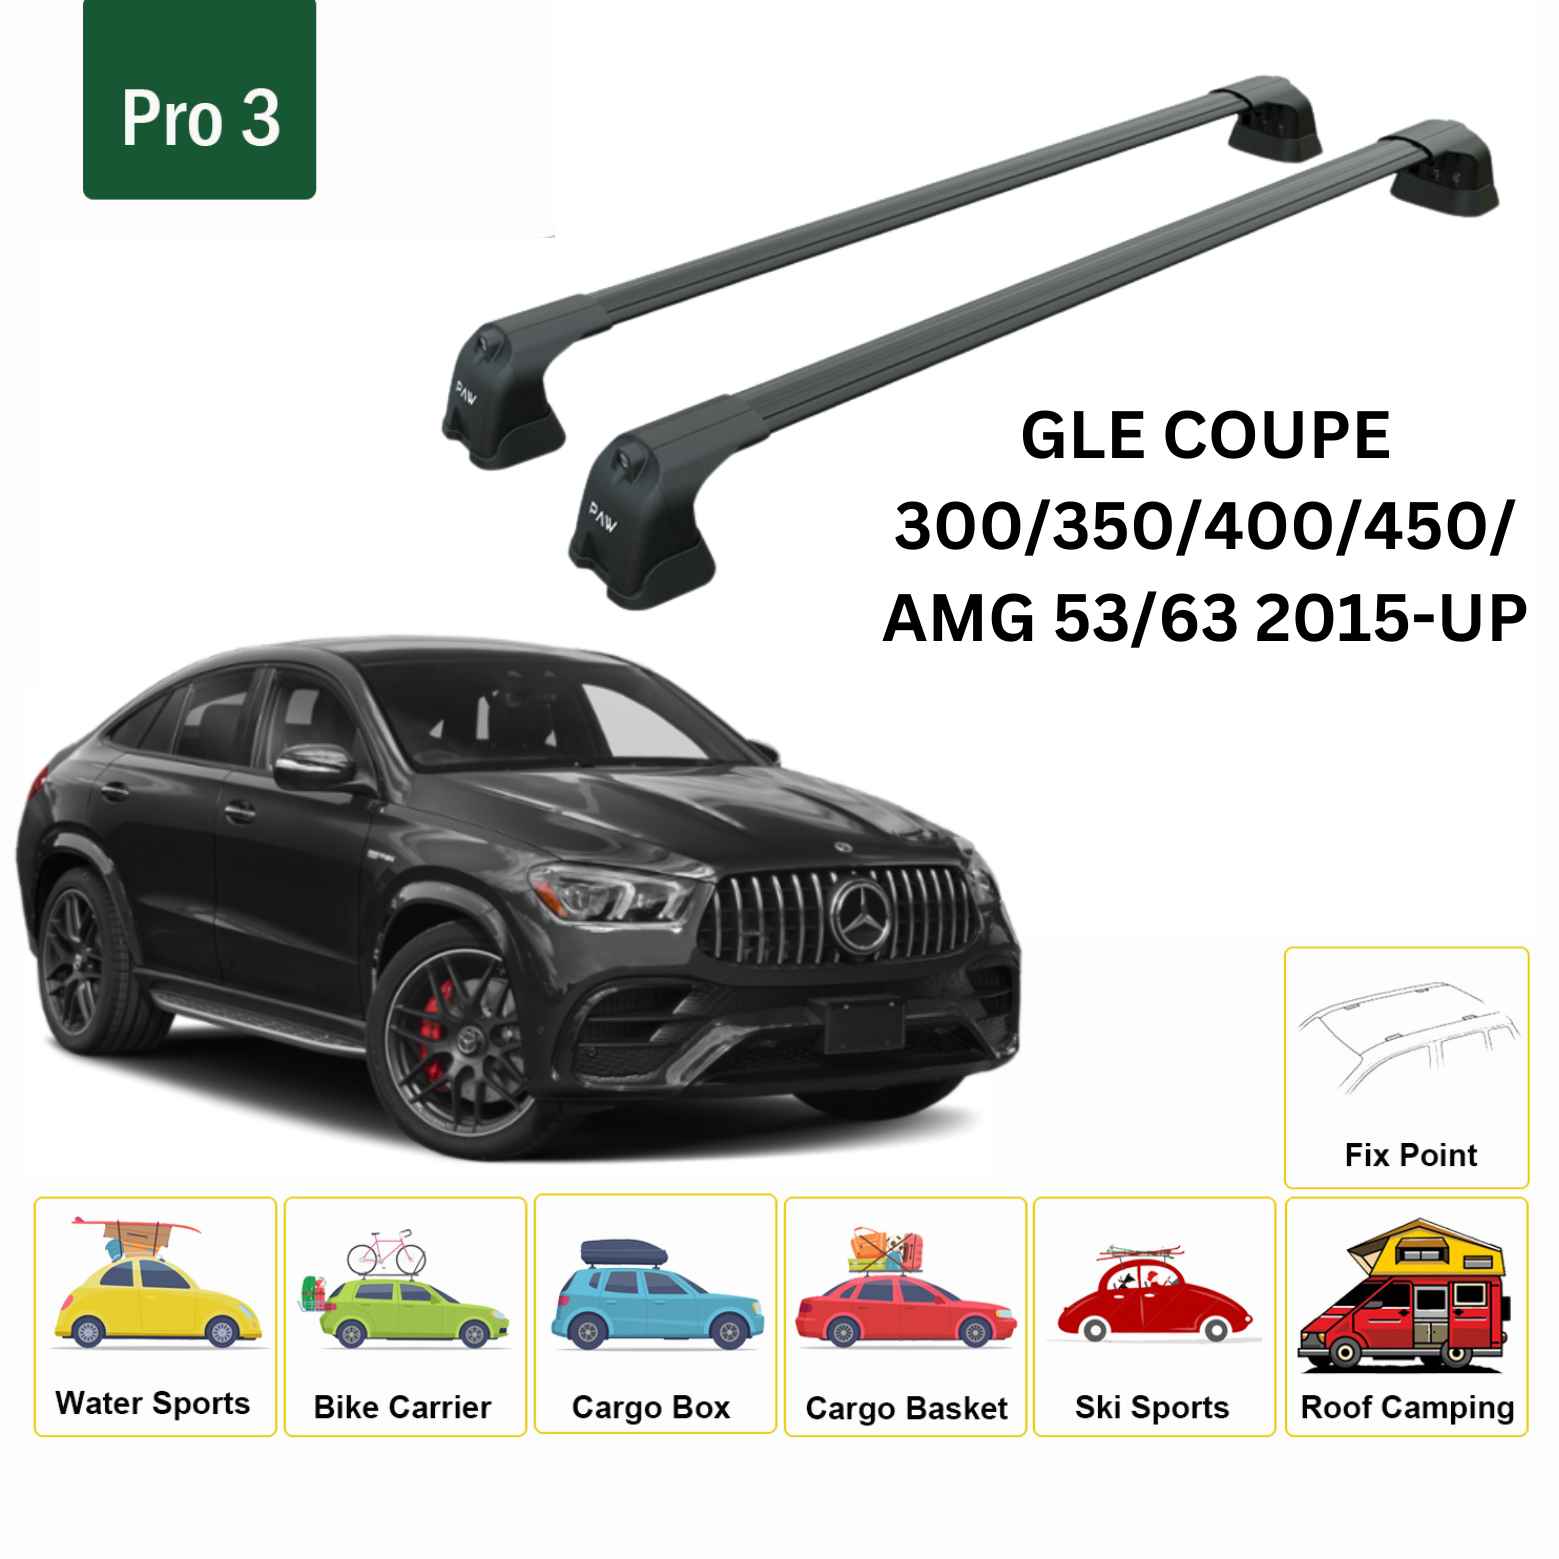 For Mercedes Benz GLE Coupe 2015-Up Roof Rack Cross Bars Fix Point Alu Black